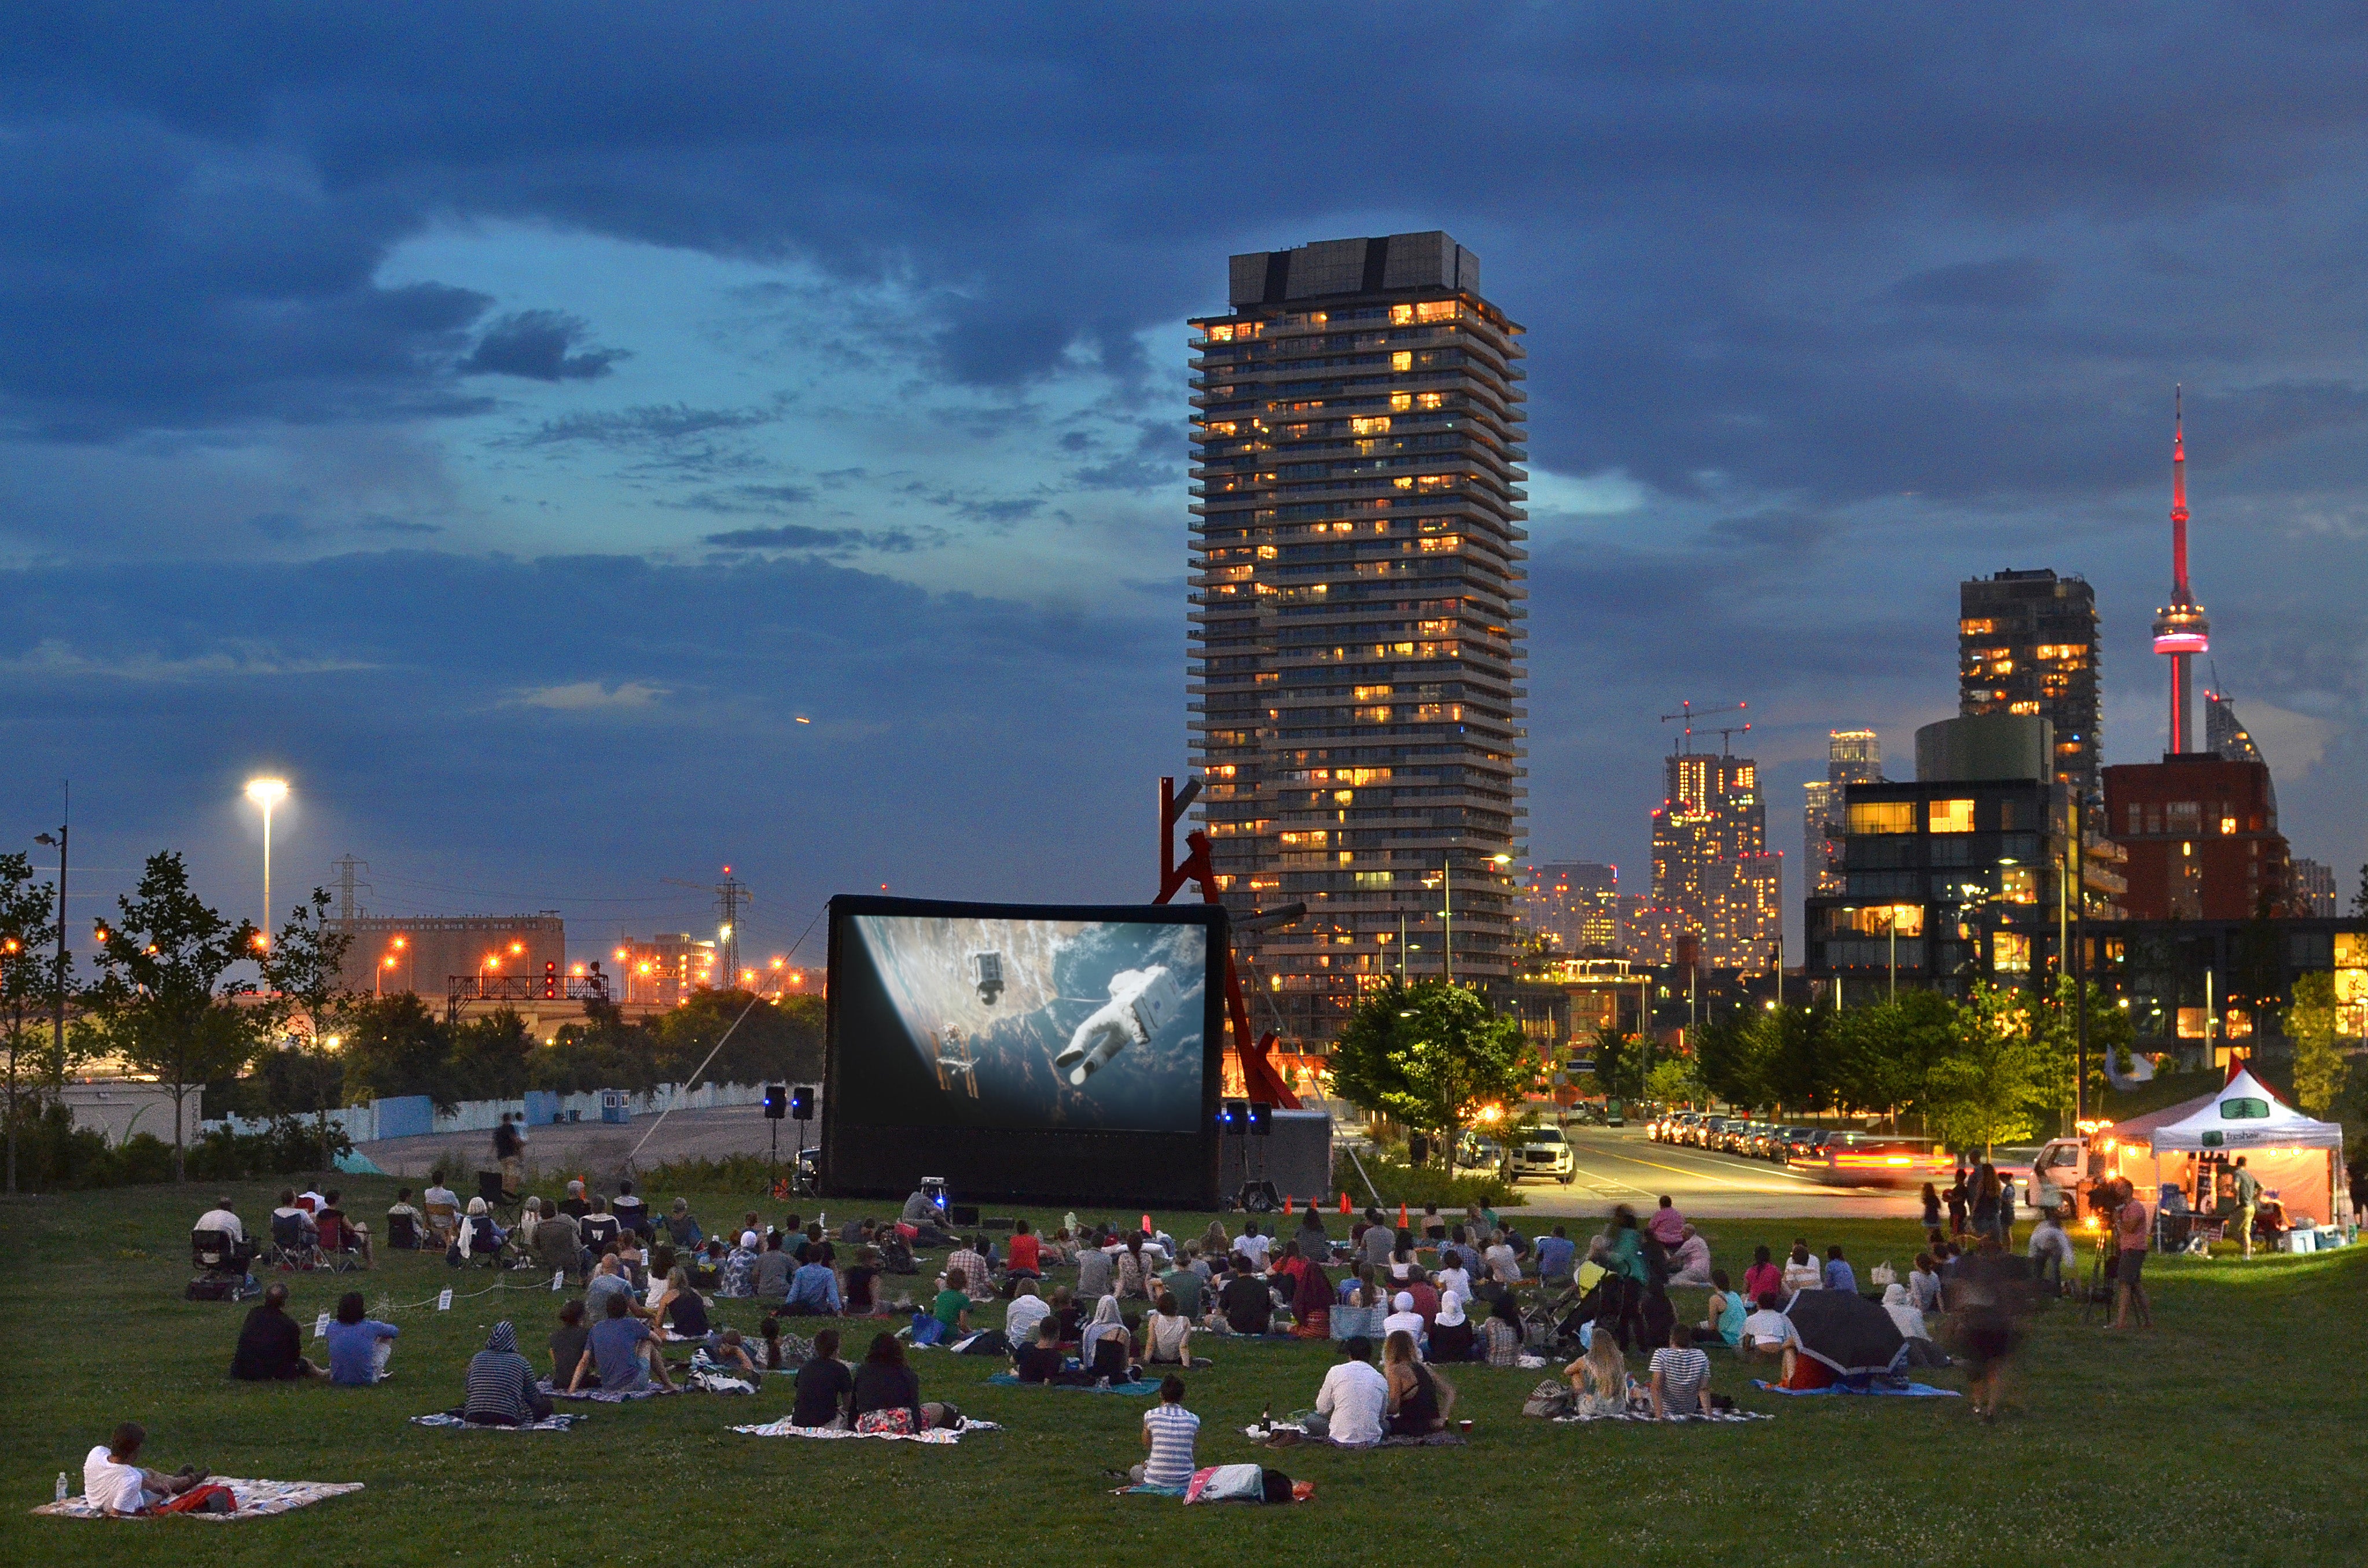 Movie-goers gathered on the south lawn of Corktown Common to enjoy an open-air screening of Apollo 13.